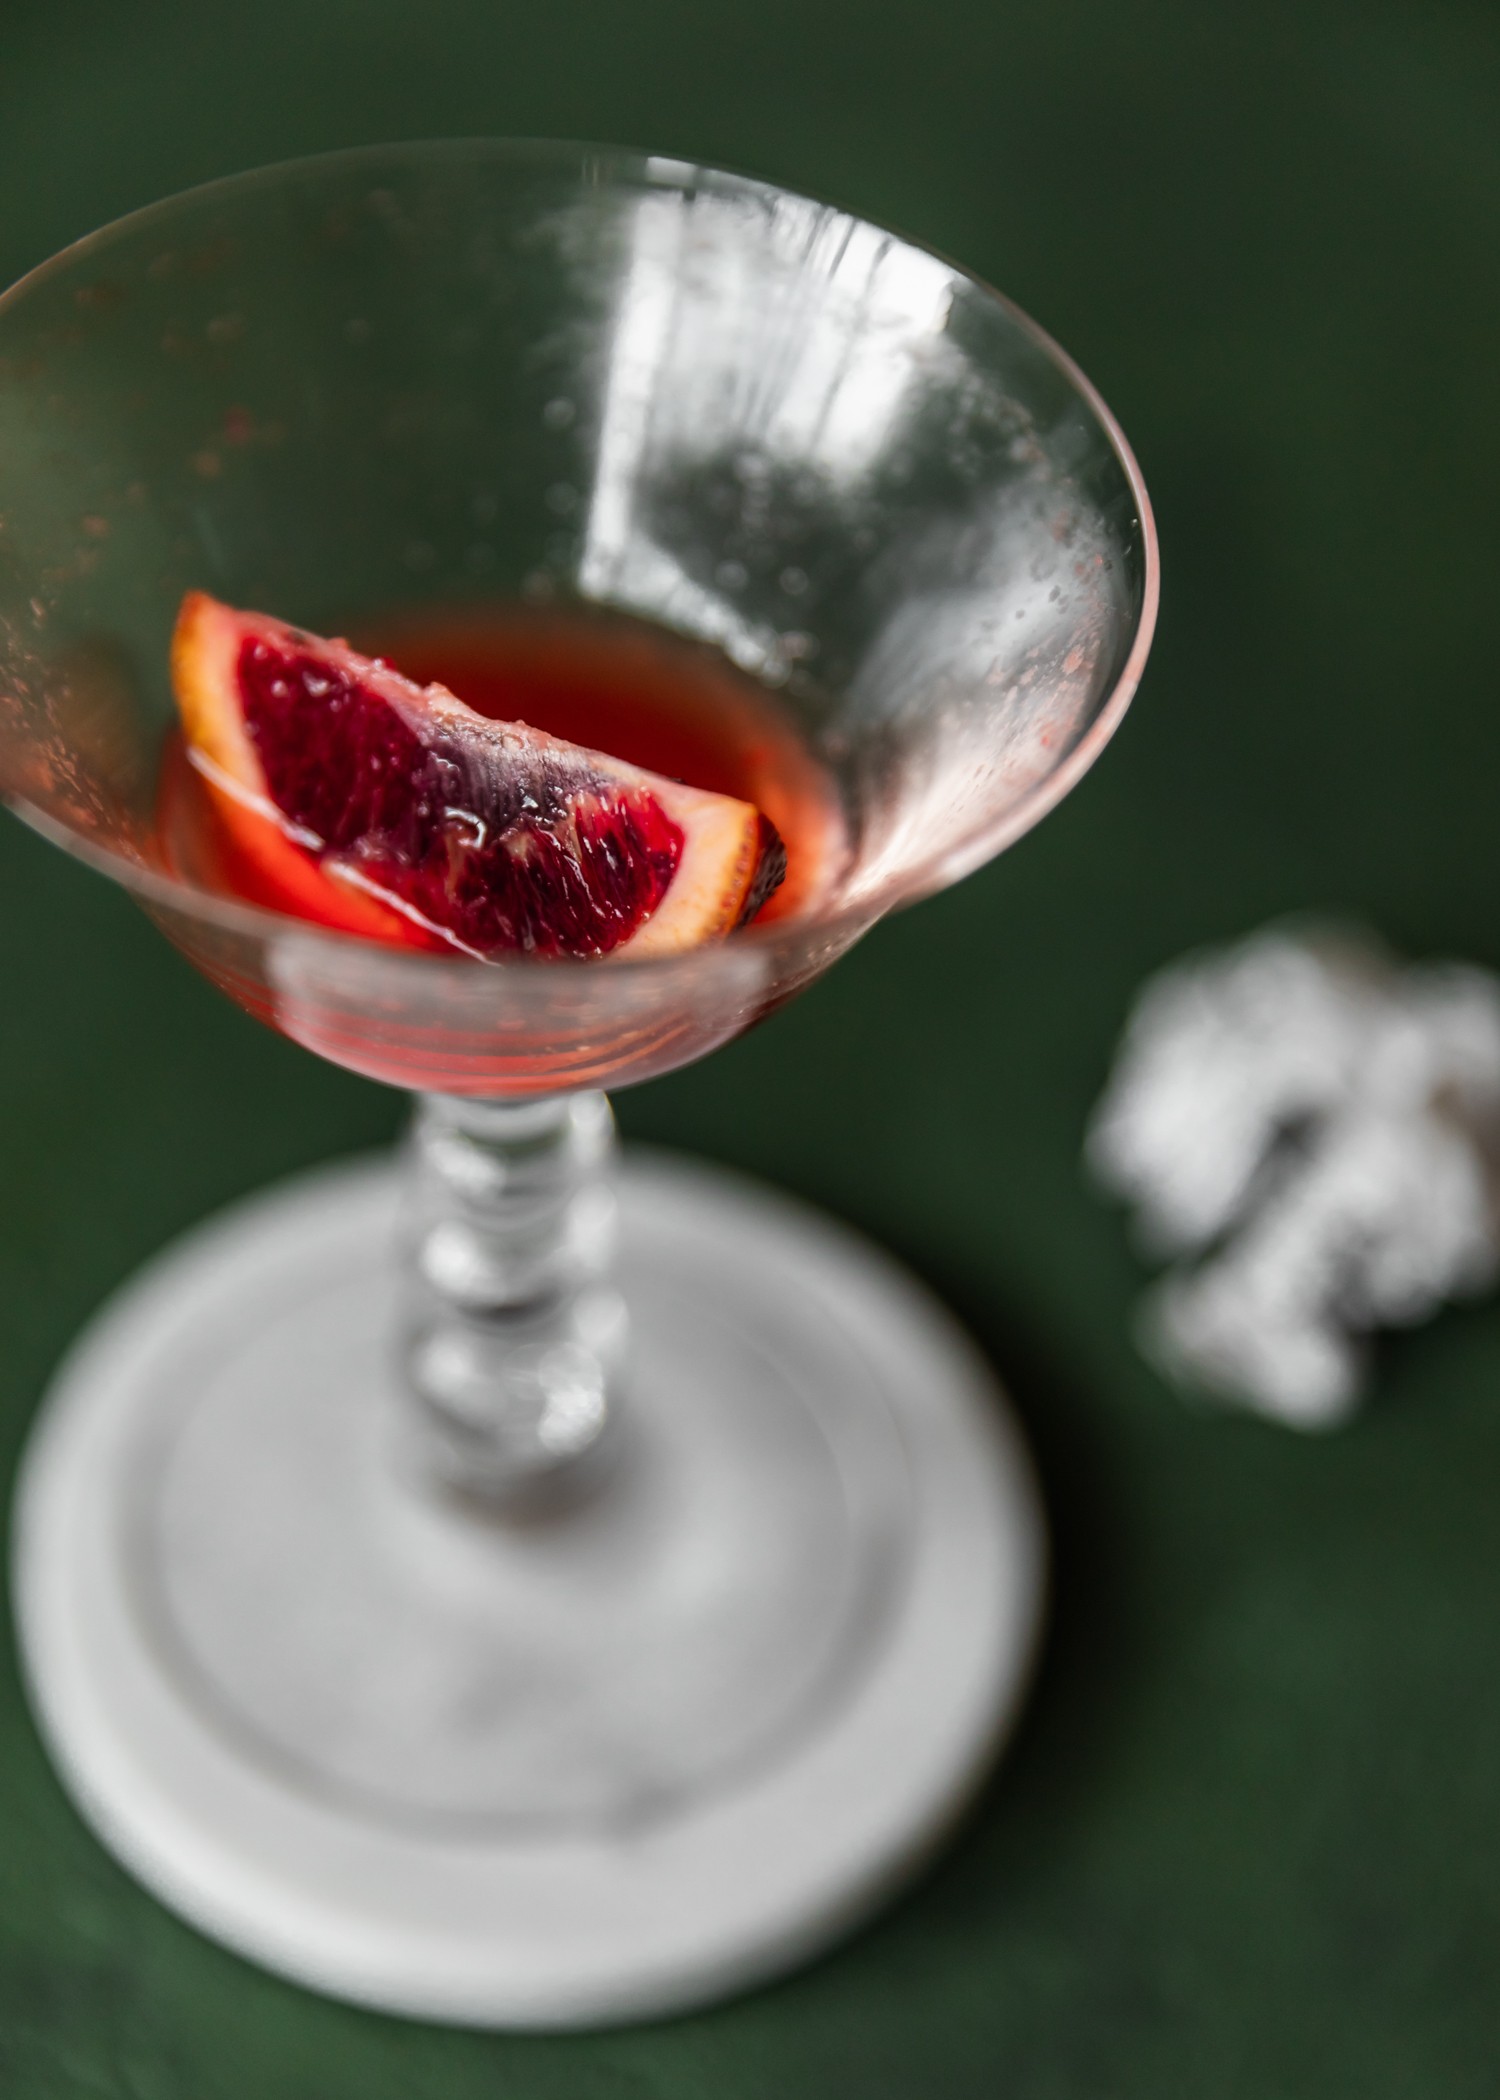 An extremely closeup picture of an almost-empty coupe glass with a red cocktail, focused on a slice of blood orange. The glass is on a marble coaster on a dark green table next to a crumpled piece of paper.